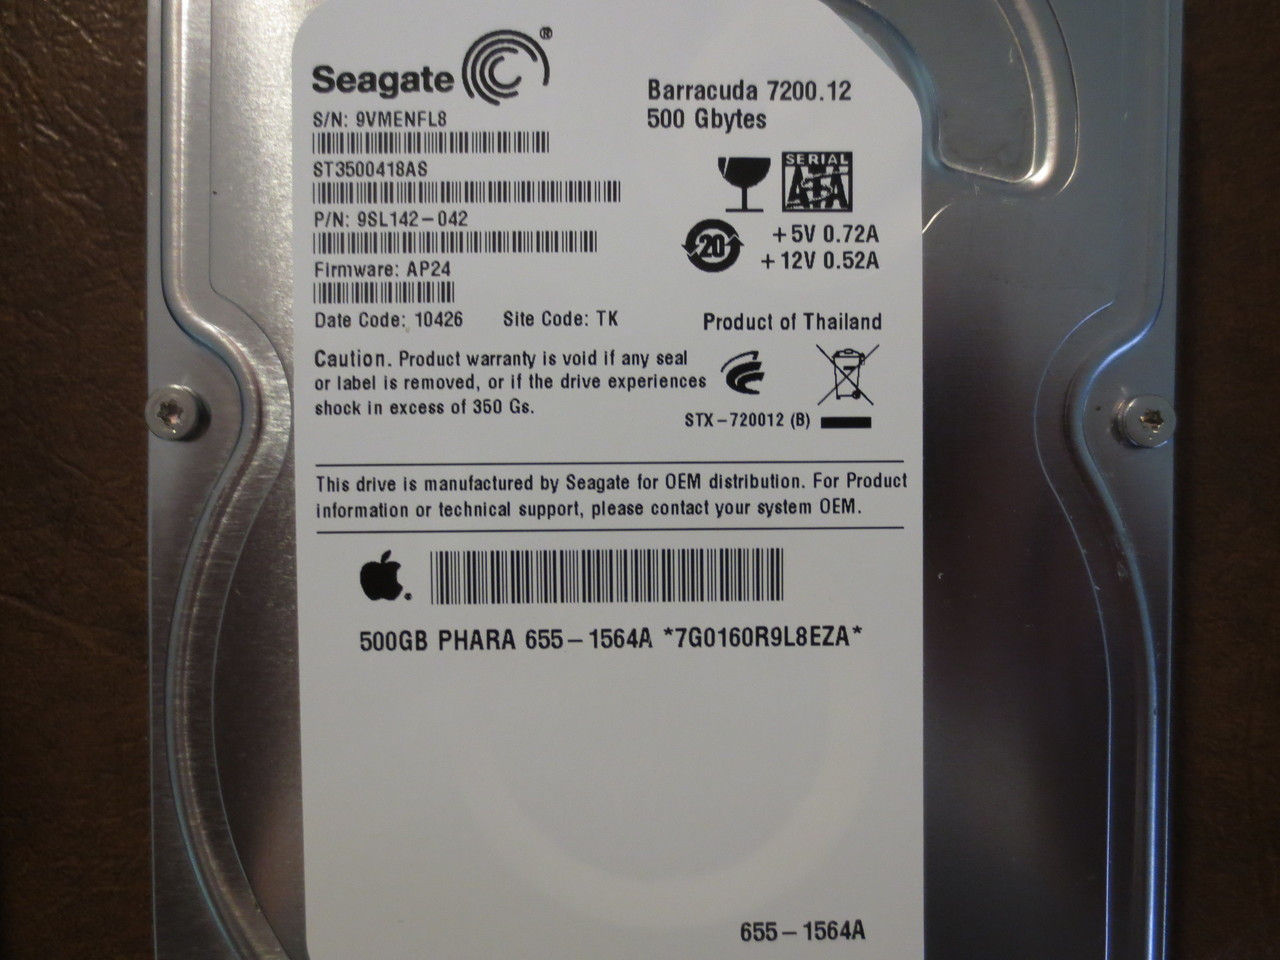 Seagate ST3500418AS 9SL142-042 FW:AP24 TK Apple#655-1564A 500gb Sata (Donor  for Parts) - Effective Electronics